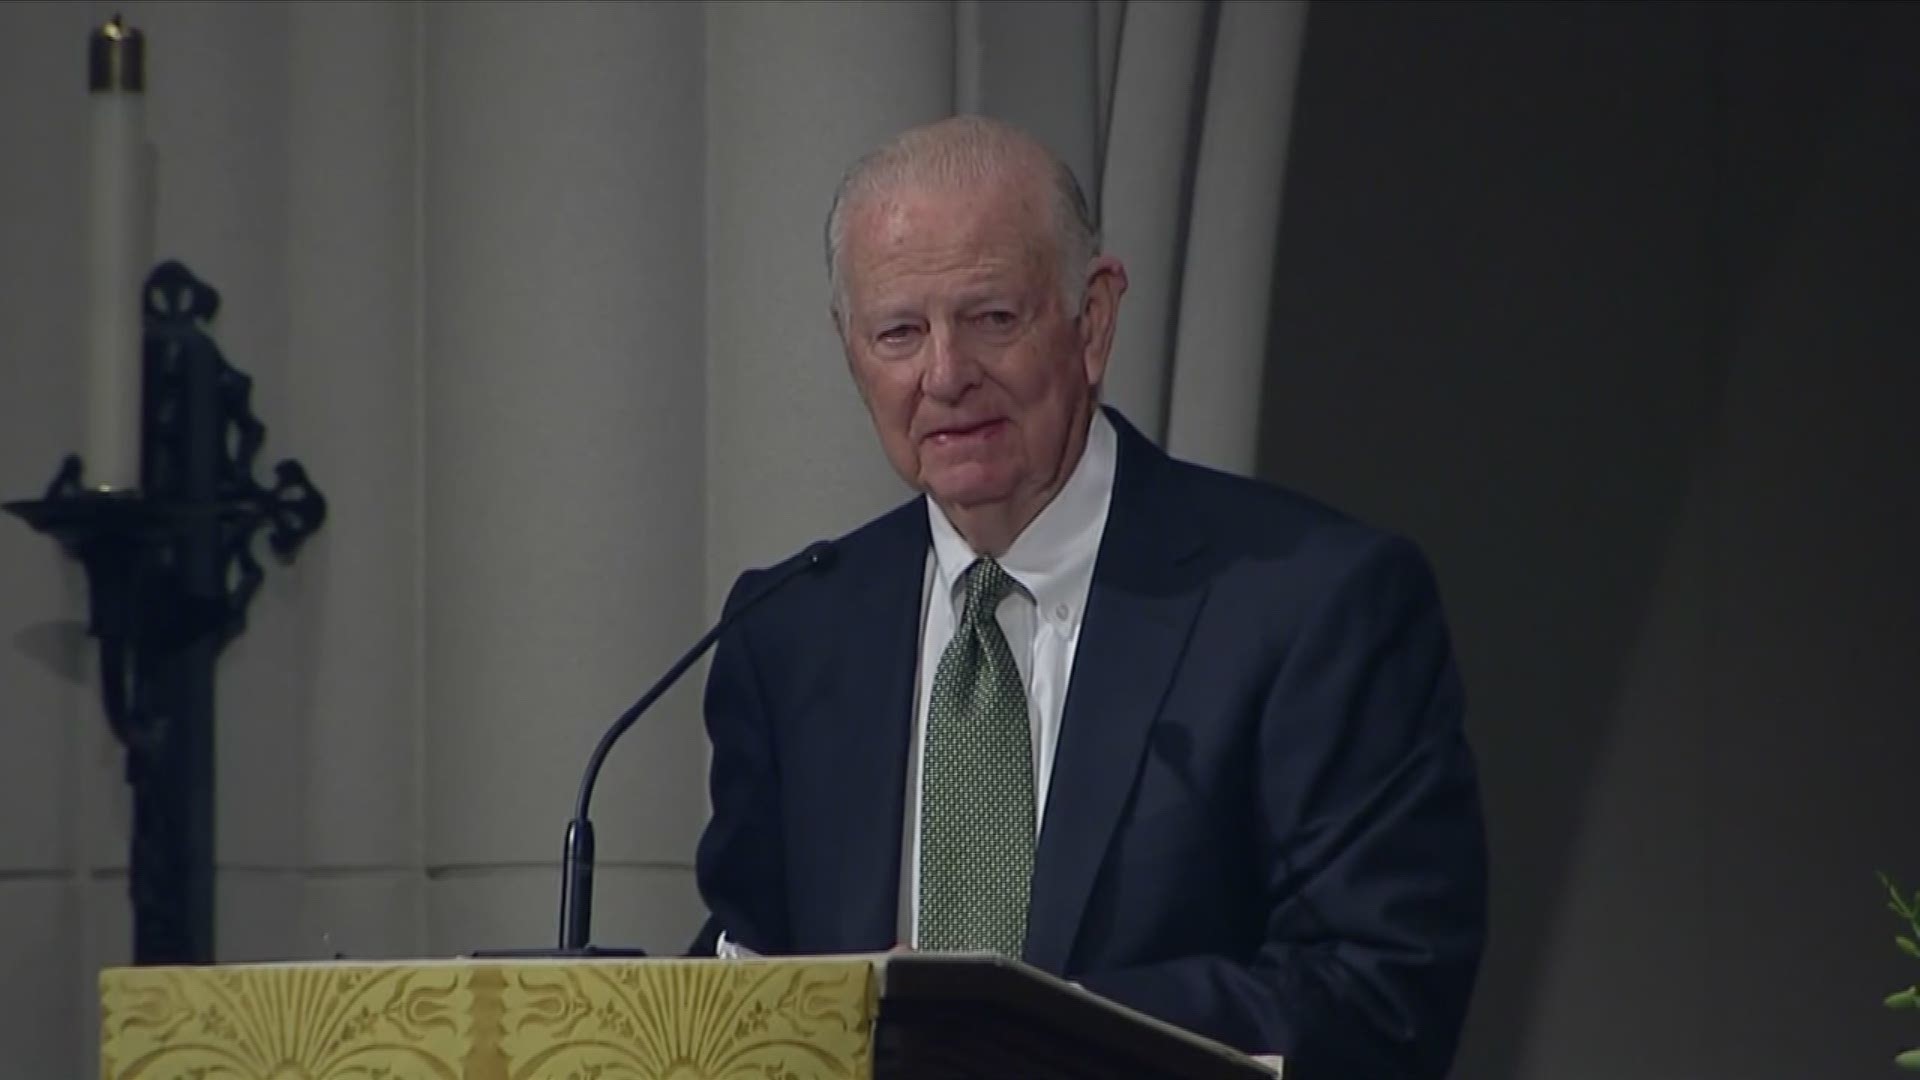 Former Secretary of State James Baker got emotional remembering his lifelong friend George H.W. Bush at the Texas funeral for the 41st president.